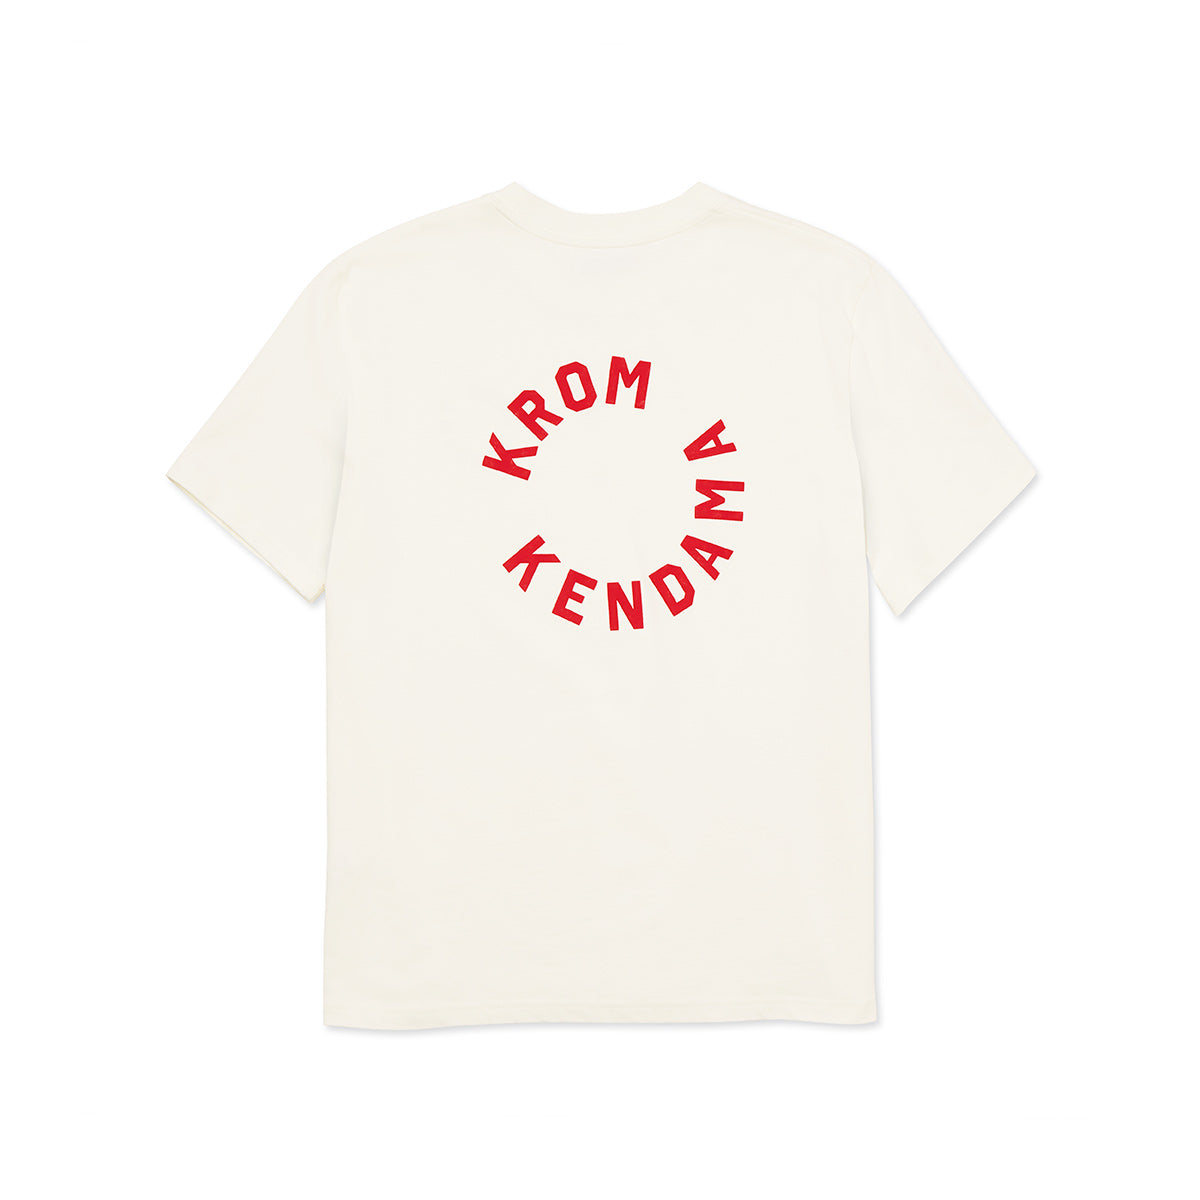 KROM PLAY LIFE COLLECTION MAIN BACK PICTURE T SHIRT WHITE